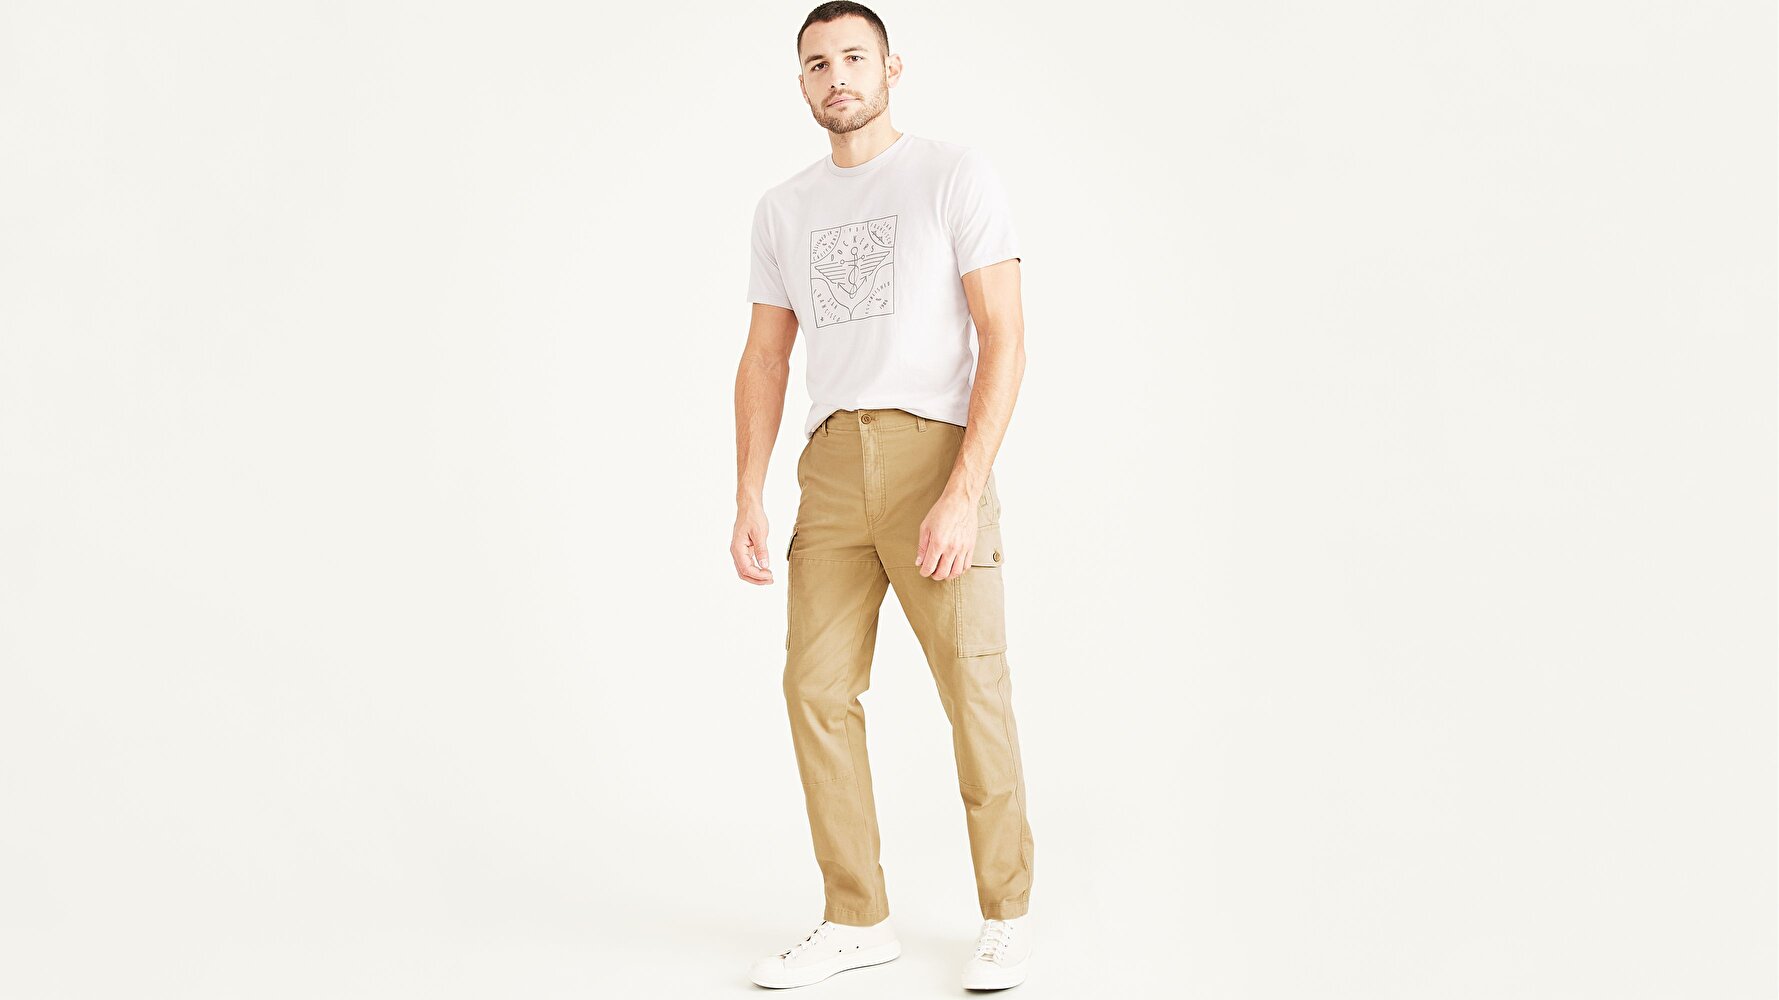 Cargo Pant, Tapered Fit